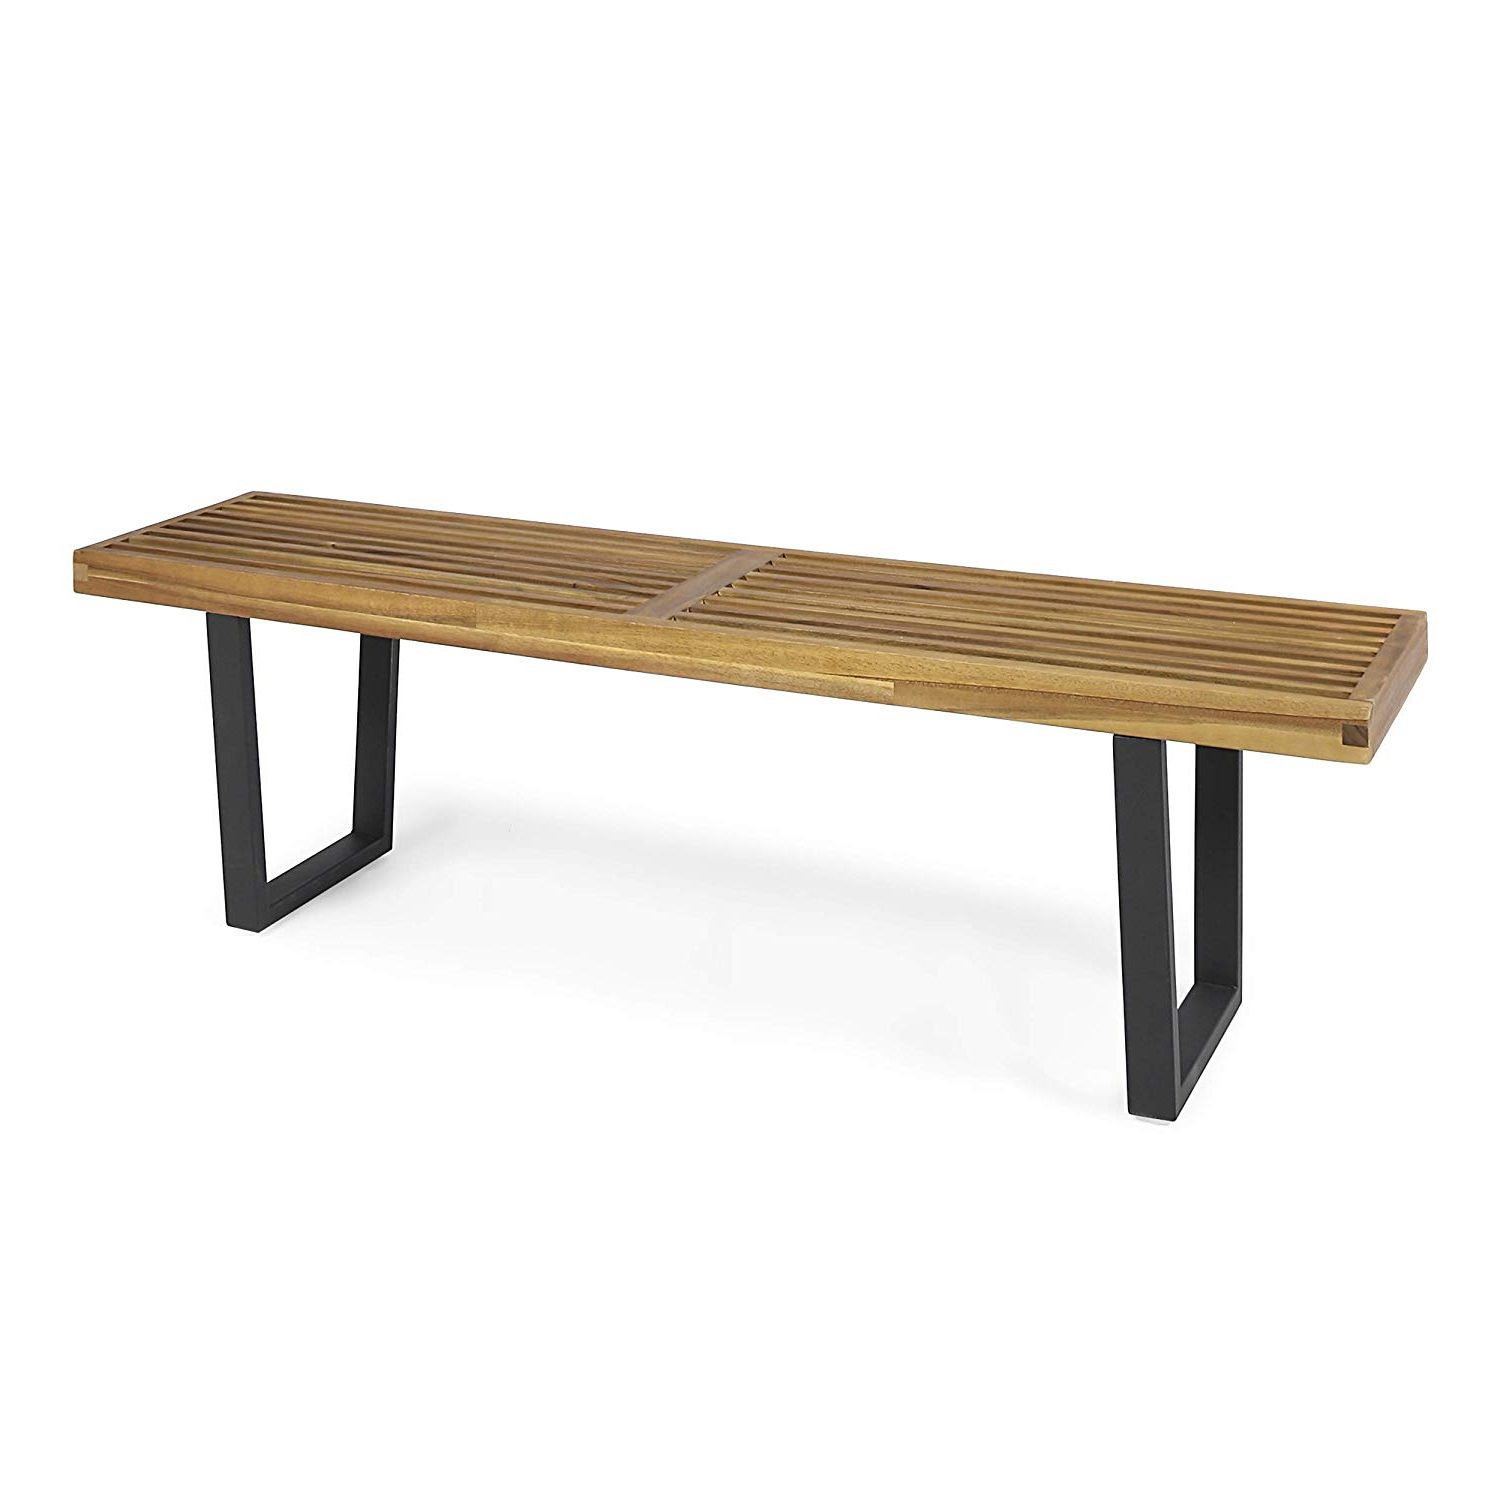 Most Recently Released Acacia Dining Tables With Black Legs With Christopher Knight Home Joa Patio Dining Bench, Acacia Wood With Iron Legs,  Modern, Contemporary, Teak Finish, Black (View 14 of 25)